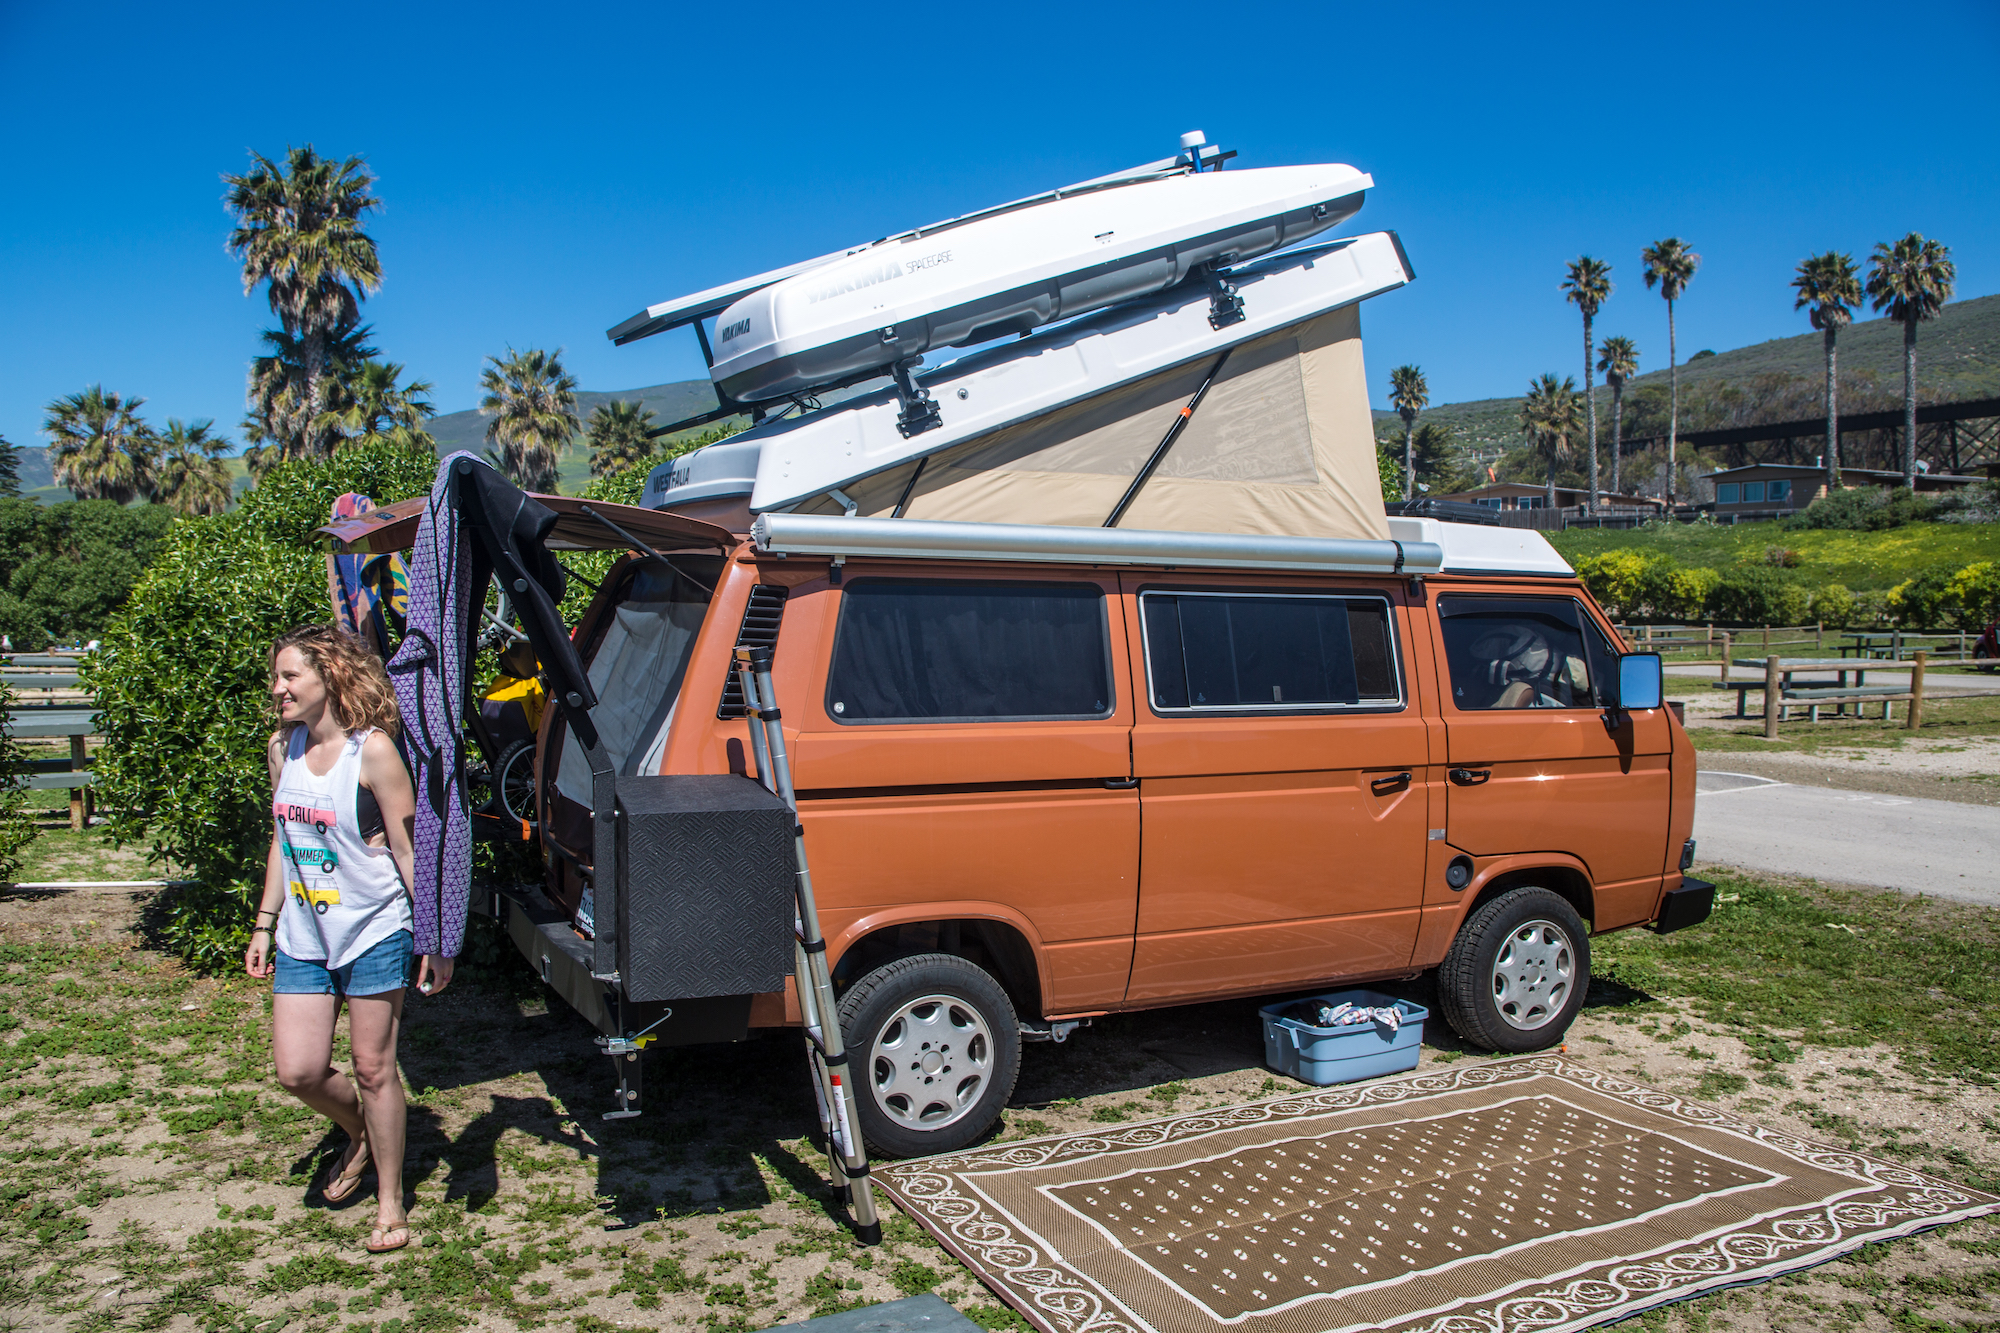 A family shows off their Volkswagen Westfalia pop-up camper rigged with solar panels on the roof on March 16, 2016, near Jalama Beach, California